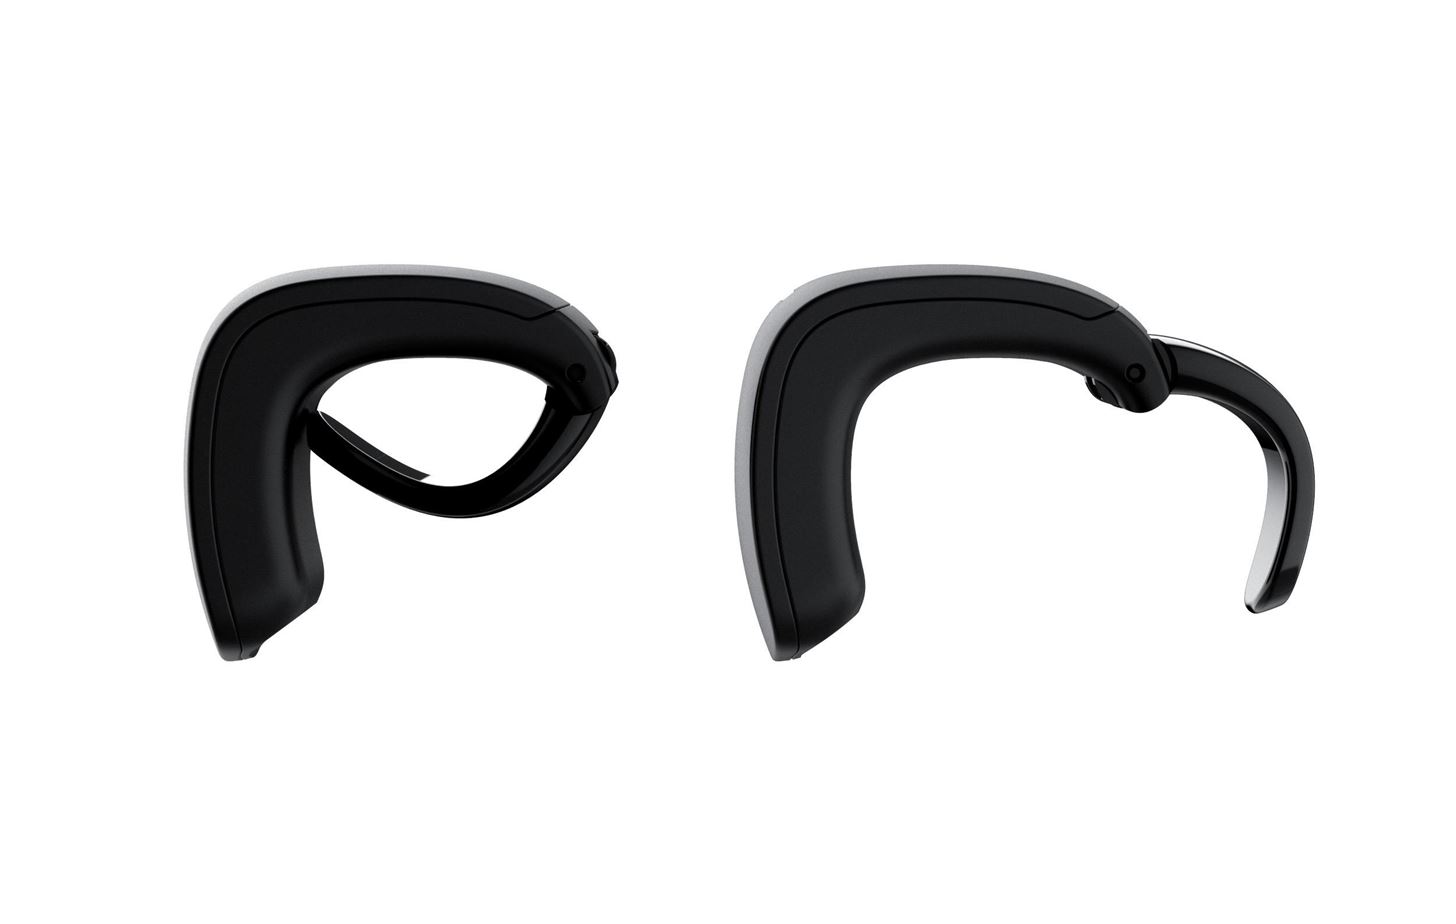 FinchRing Controller Handles Gesture Control & Hand-Tracking for Nreal Light & Other AR Headsets